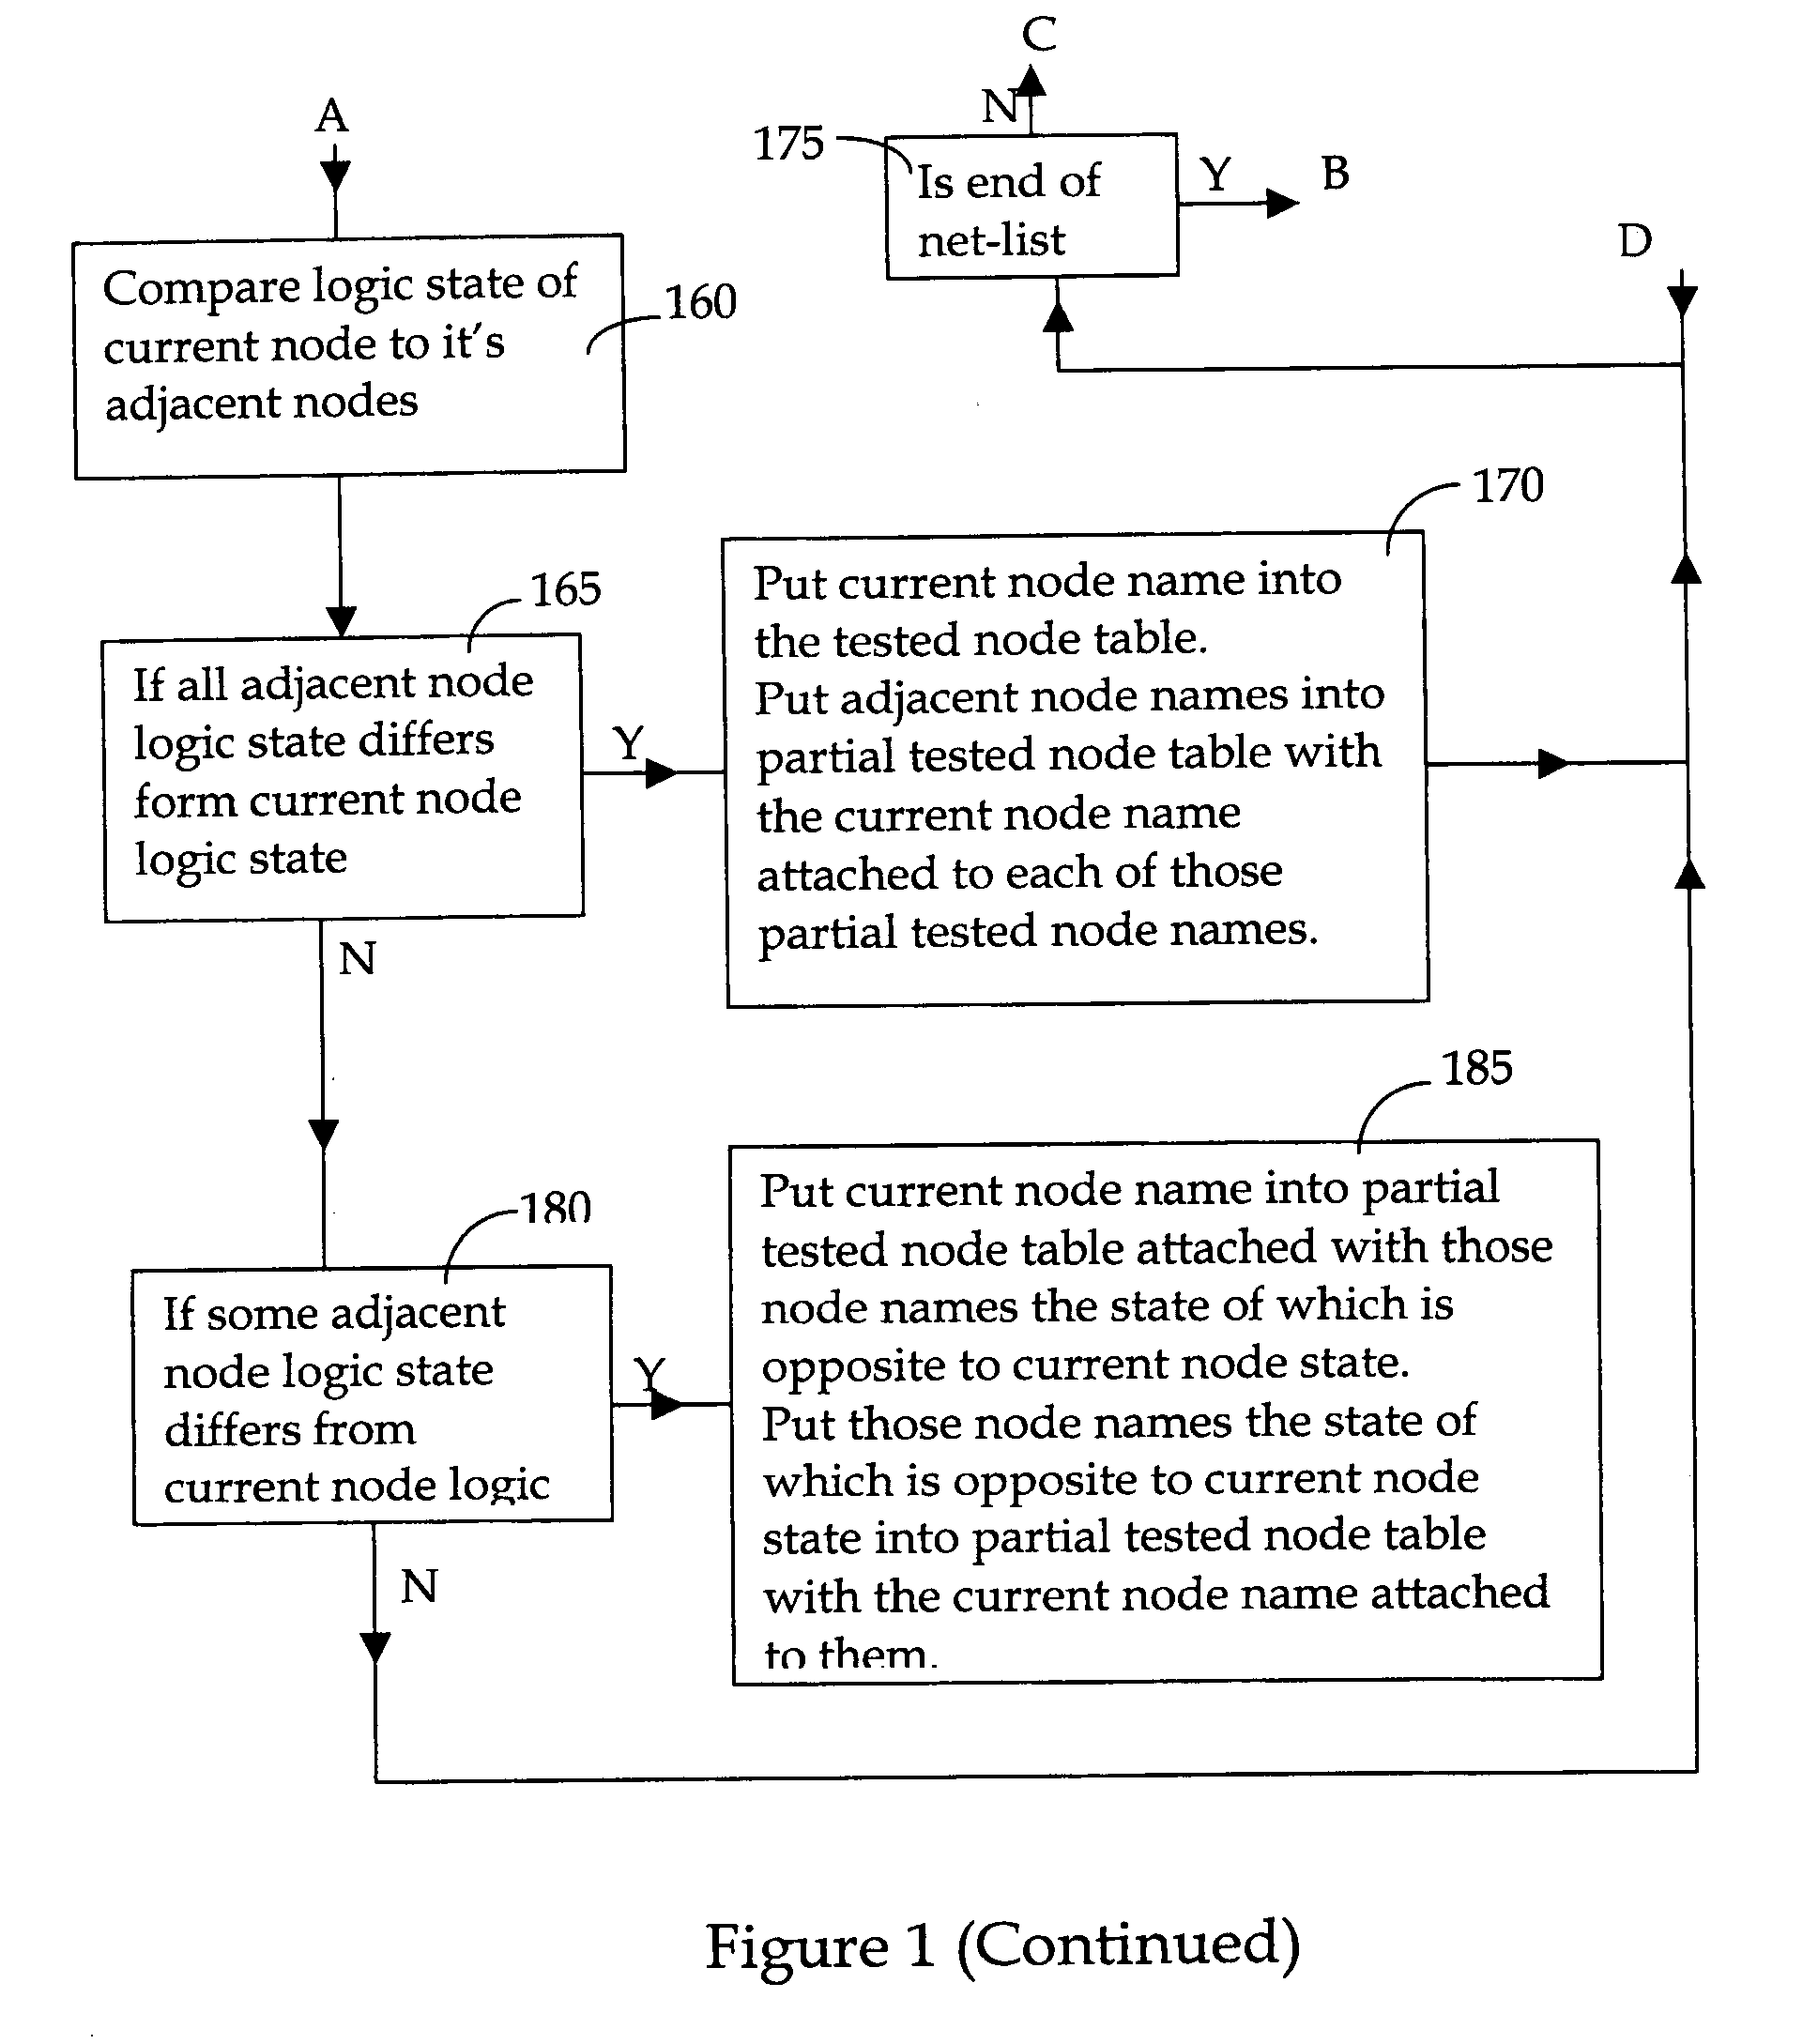 Generation of test vectors for testing electronic circuits taking into account of defect probability